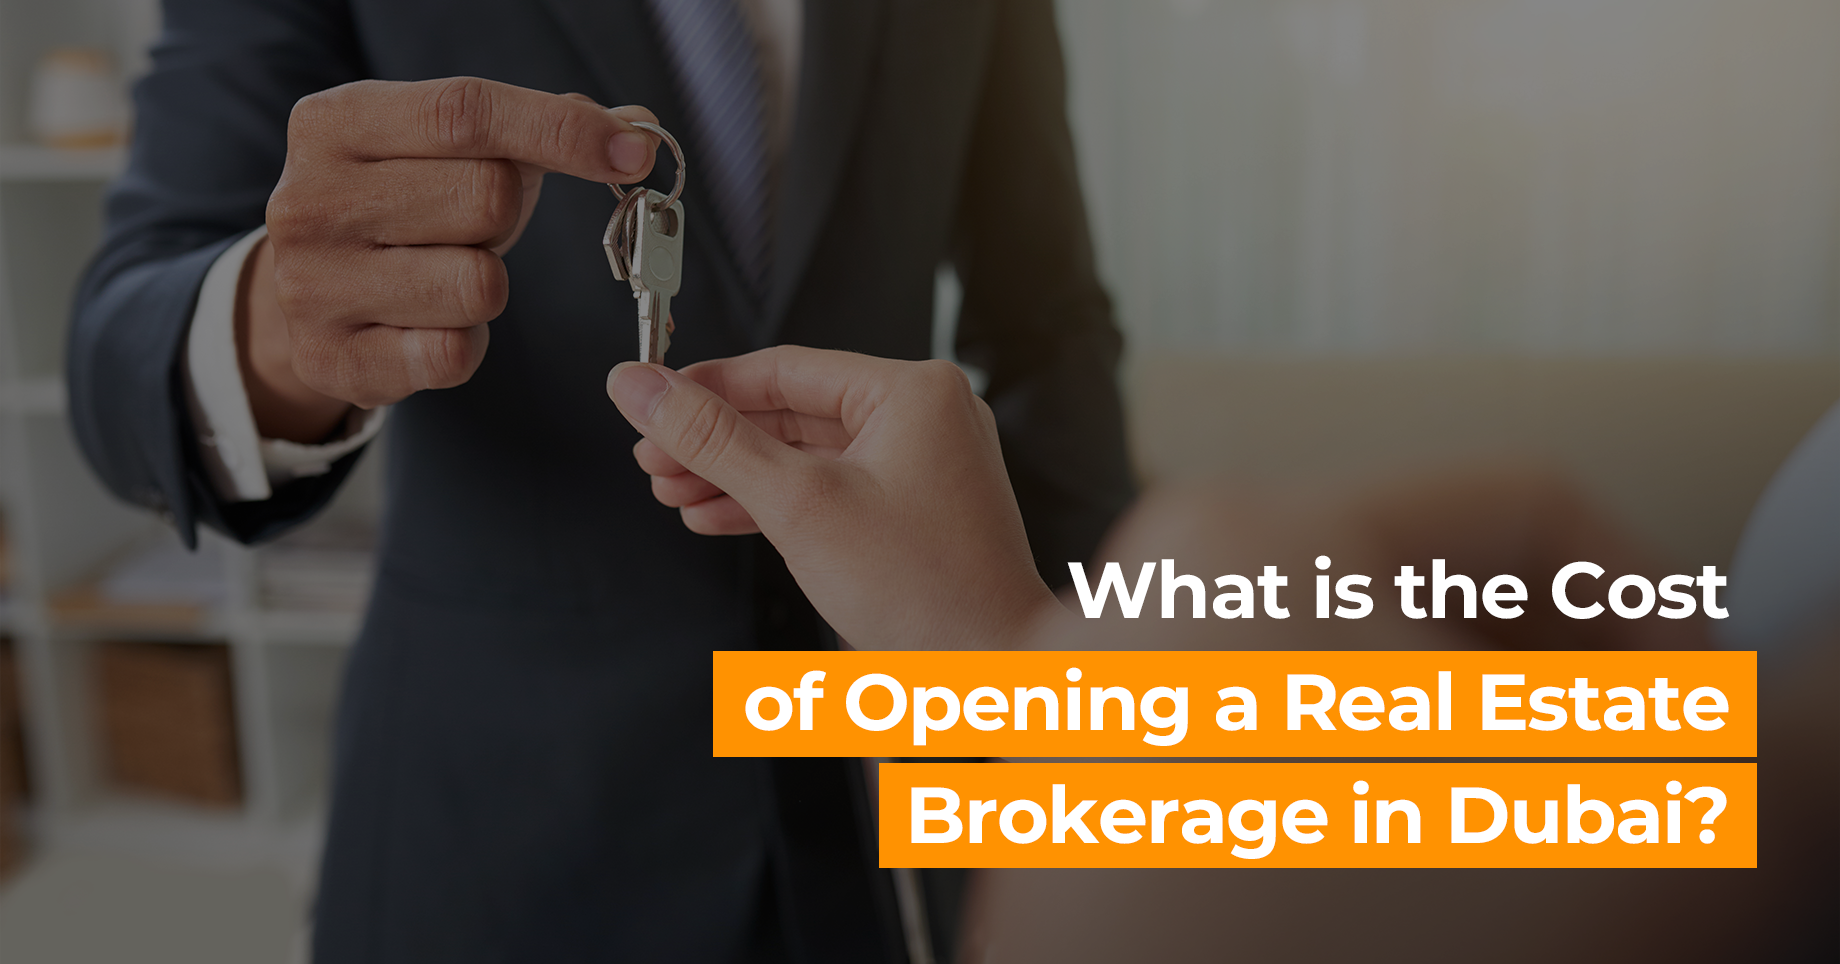 What is the Cost of Opening a Real Estate Brokerage in Dubai?